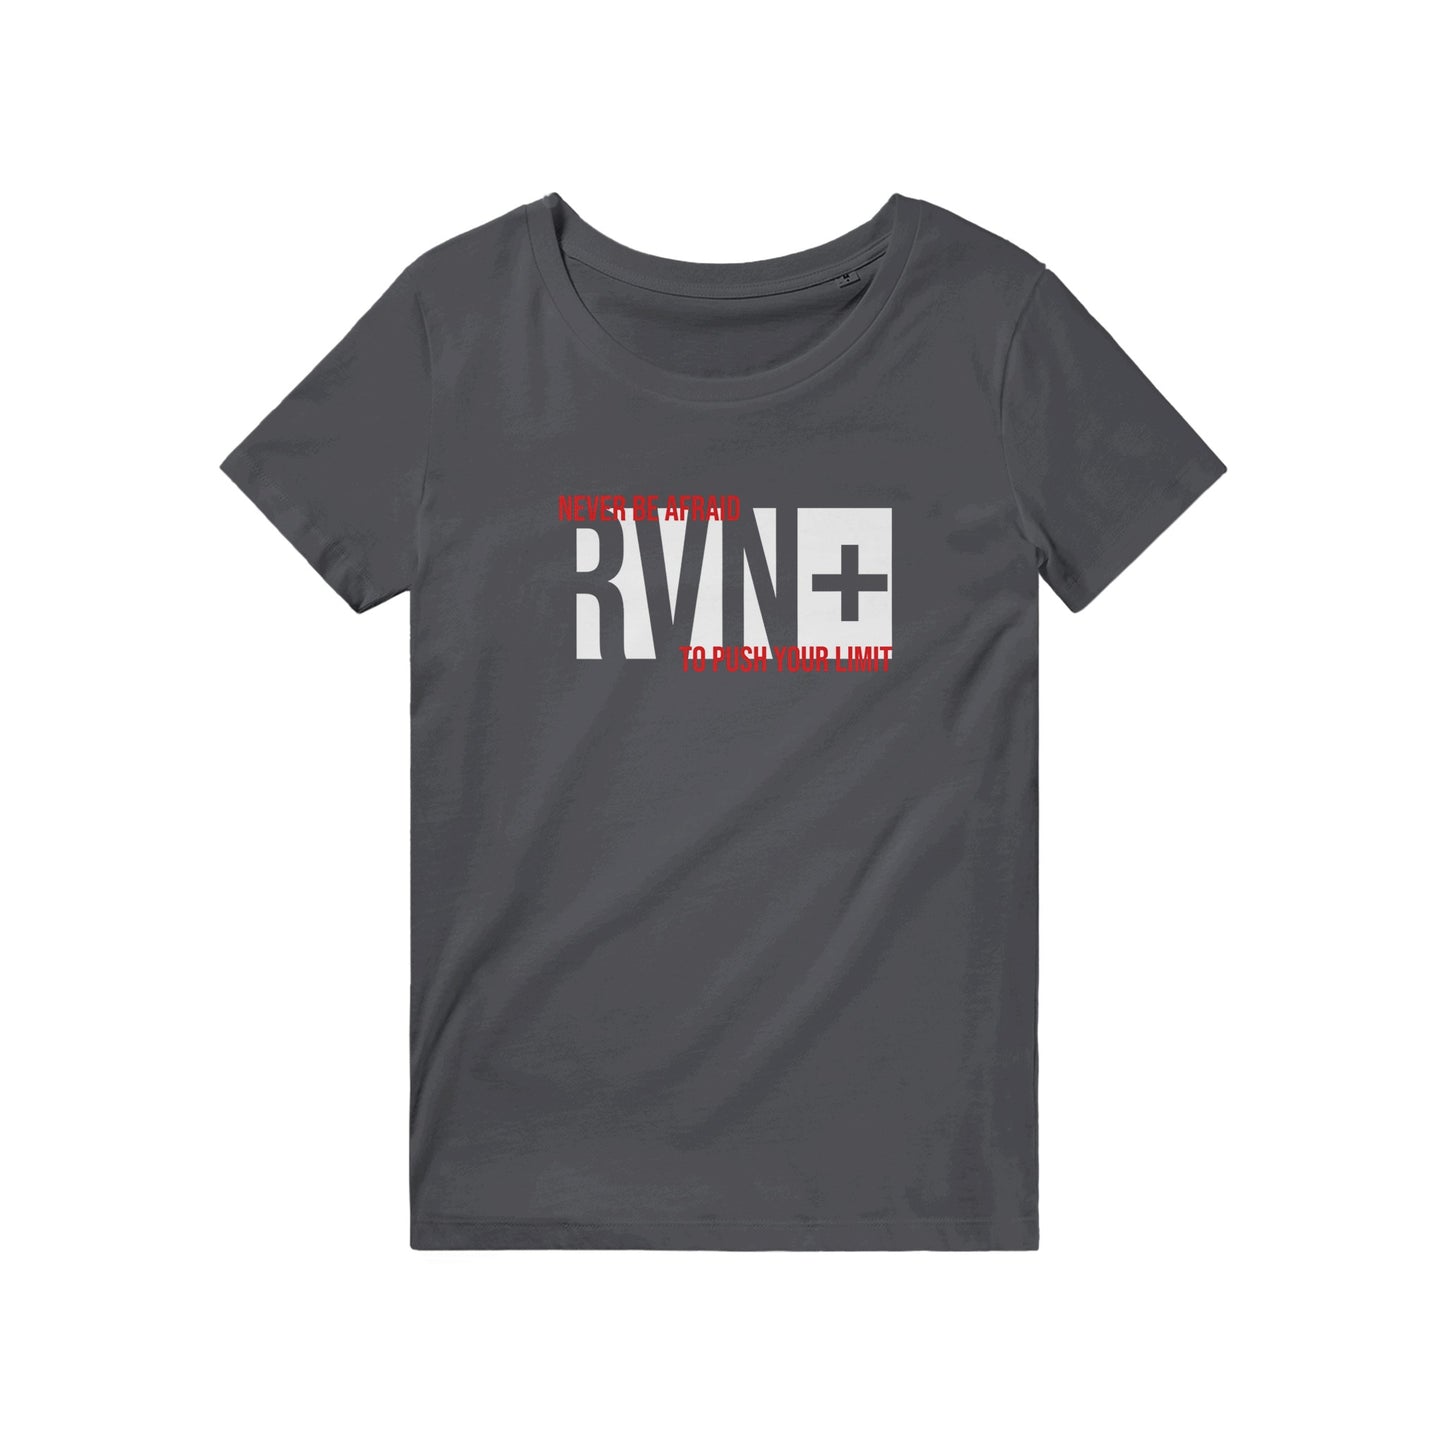 Elevate Your Limits with the RVN+ 'Push Your Limit' Minimalist Organic Tee!